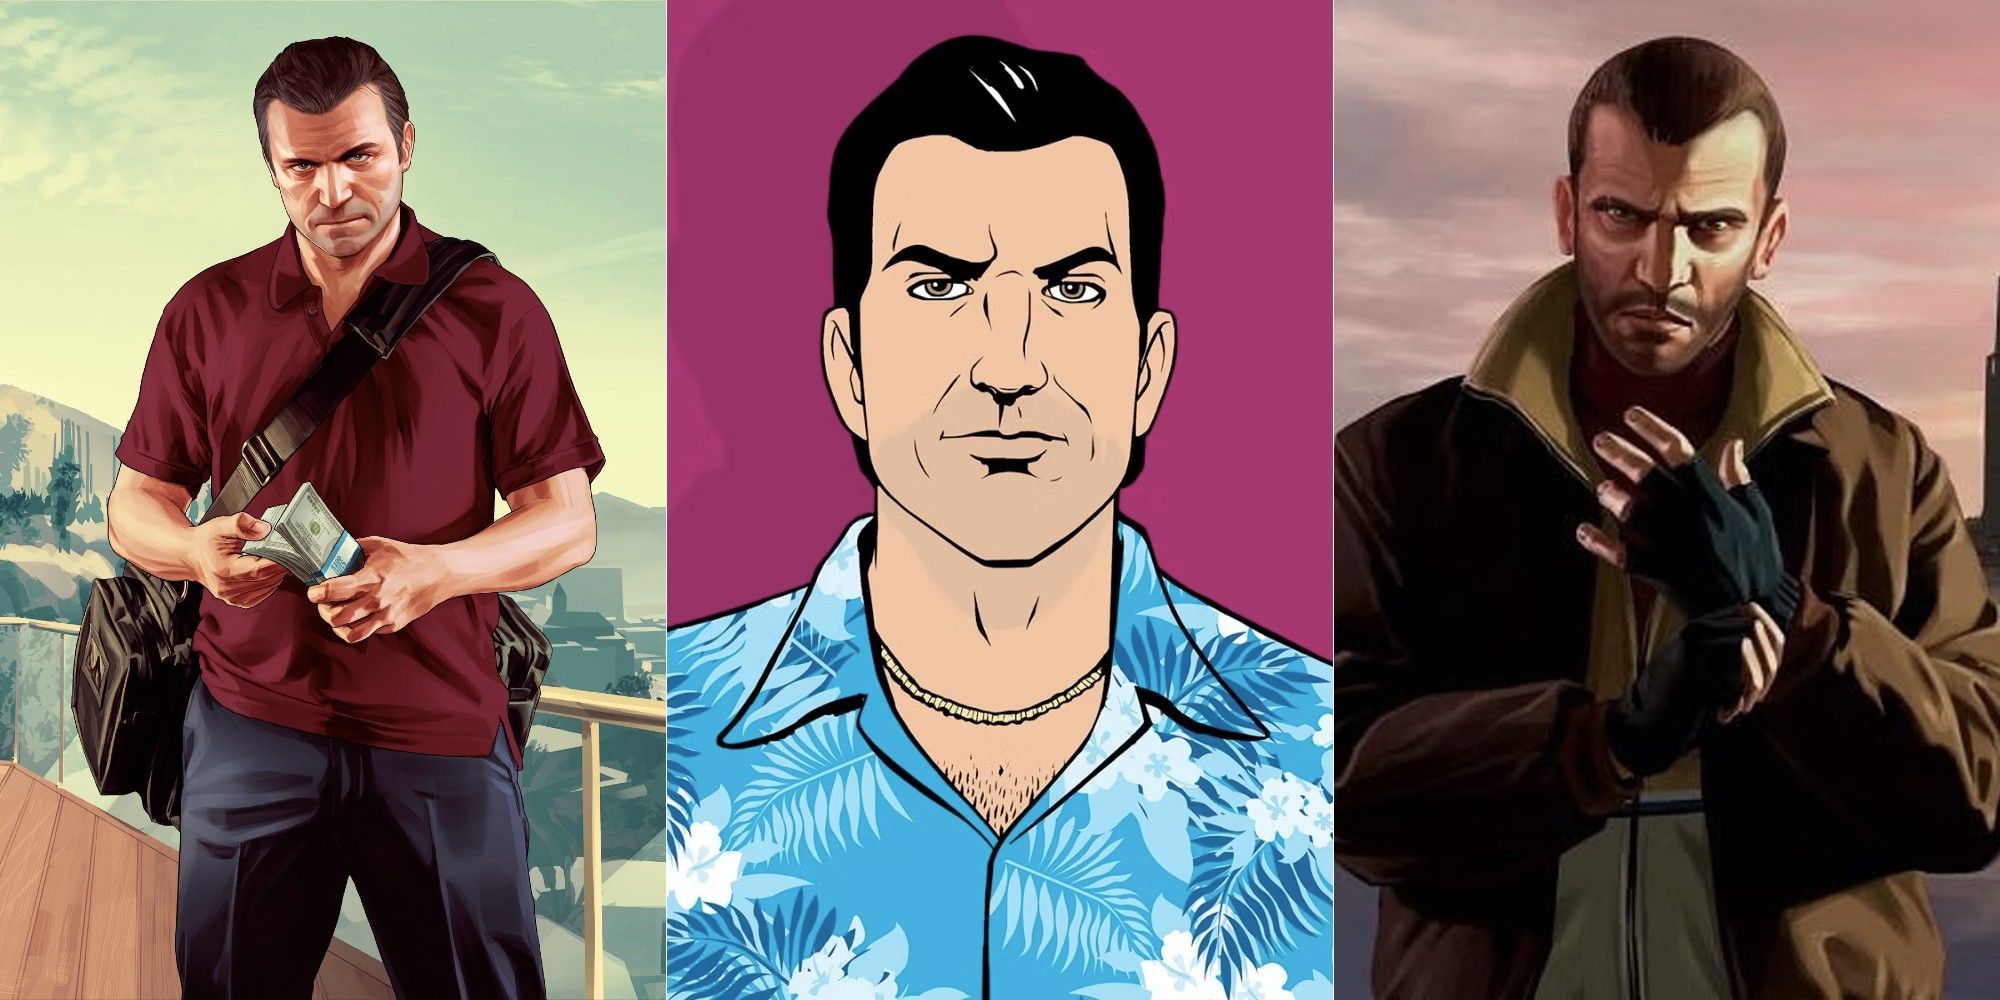 A vertically split image showing portraits of three GTA protagonists, from left to right: Michale from GTA 5, Tommy from GTA Vice City, and Niko from GTA 4.